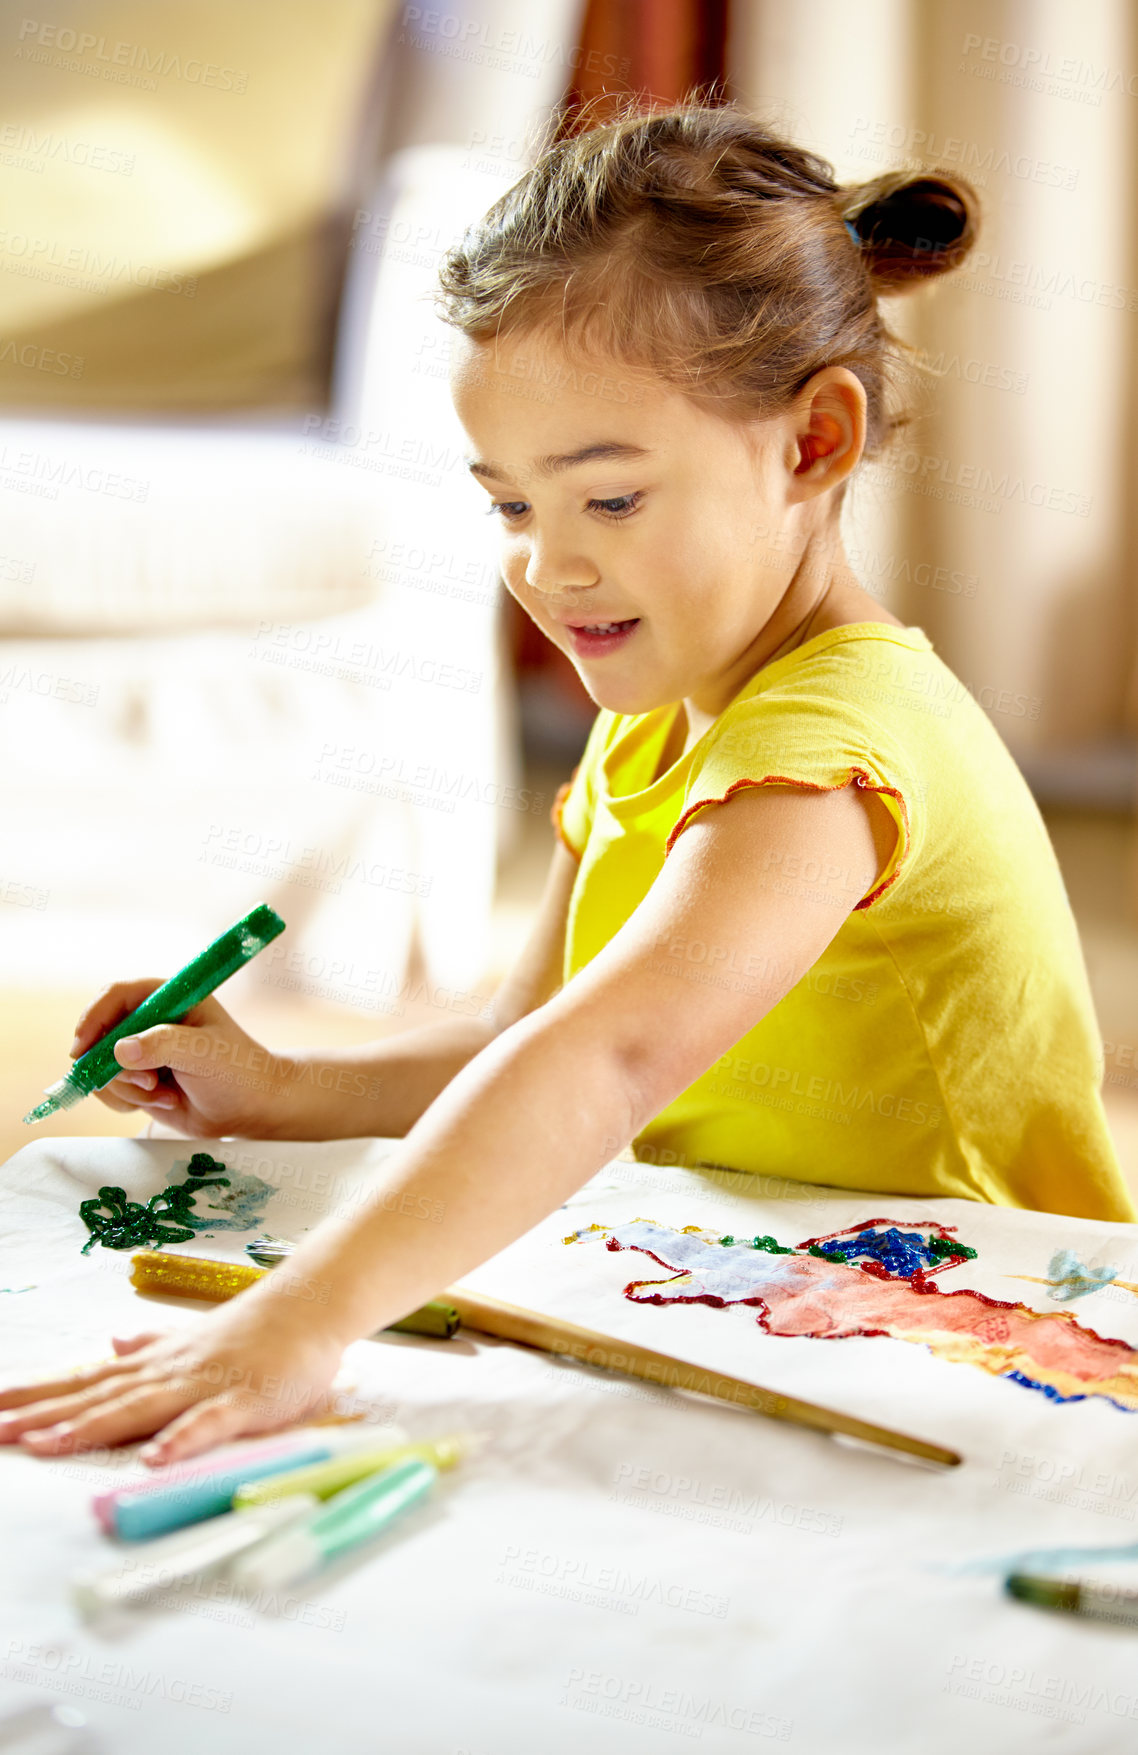 Buy stock photo Painting, art and girl kid with homework, assignment or project for school at home. Colorful, creative and young student creating art on paper for hobby, child development or activity at house.